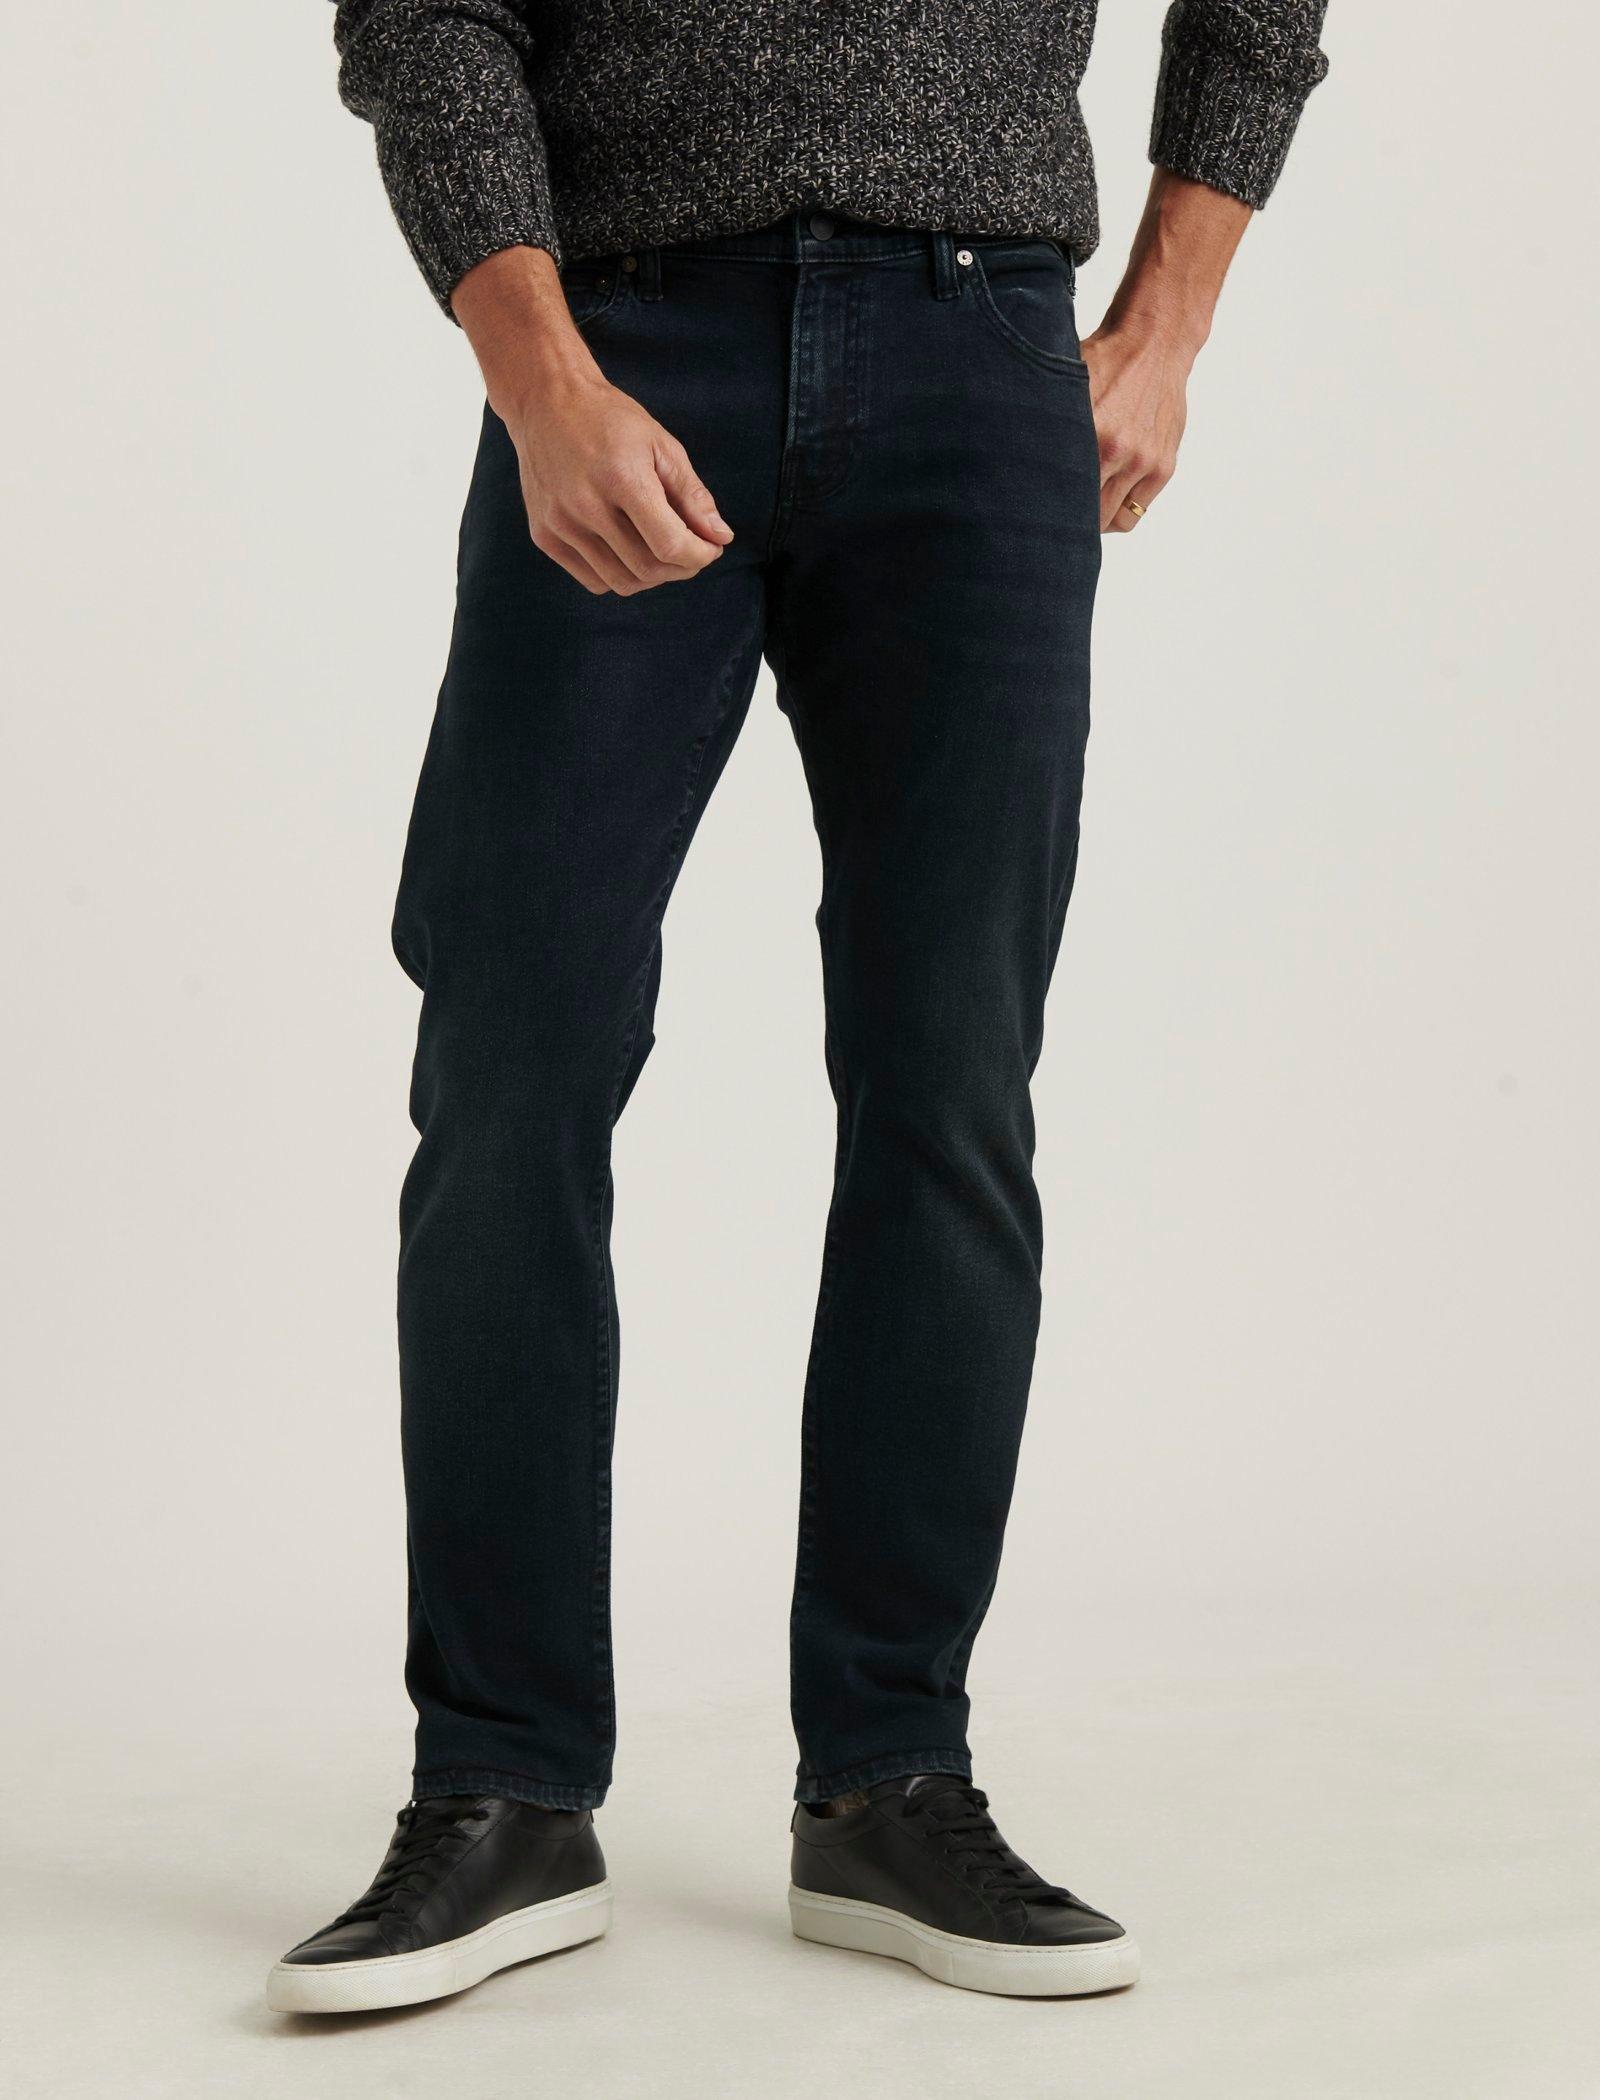 mens lucky brand jeans clearance